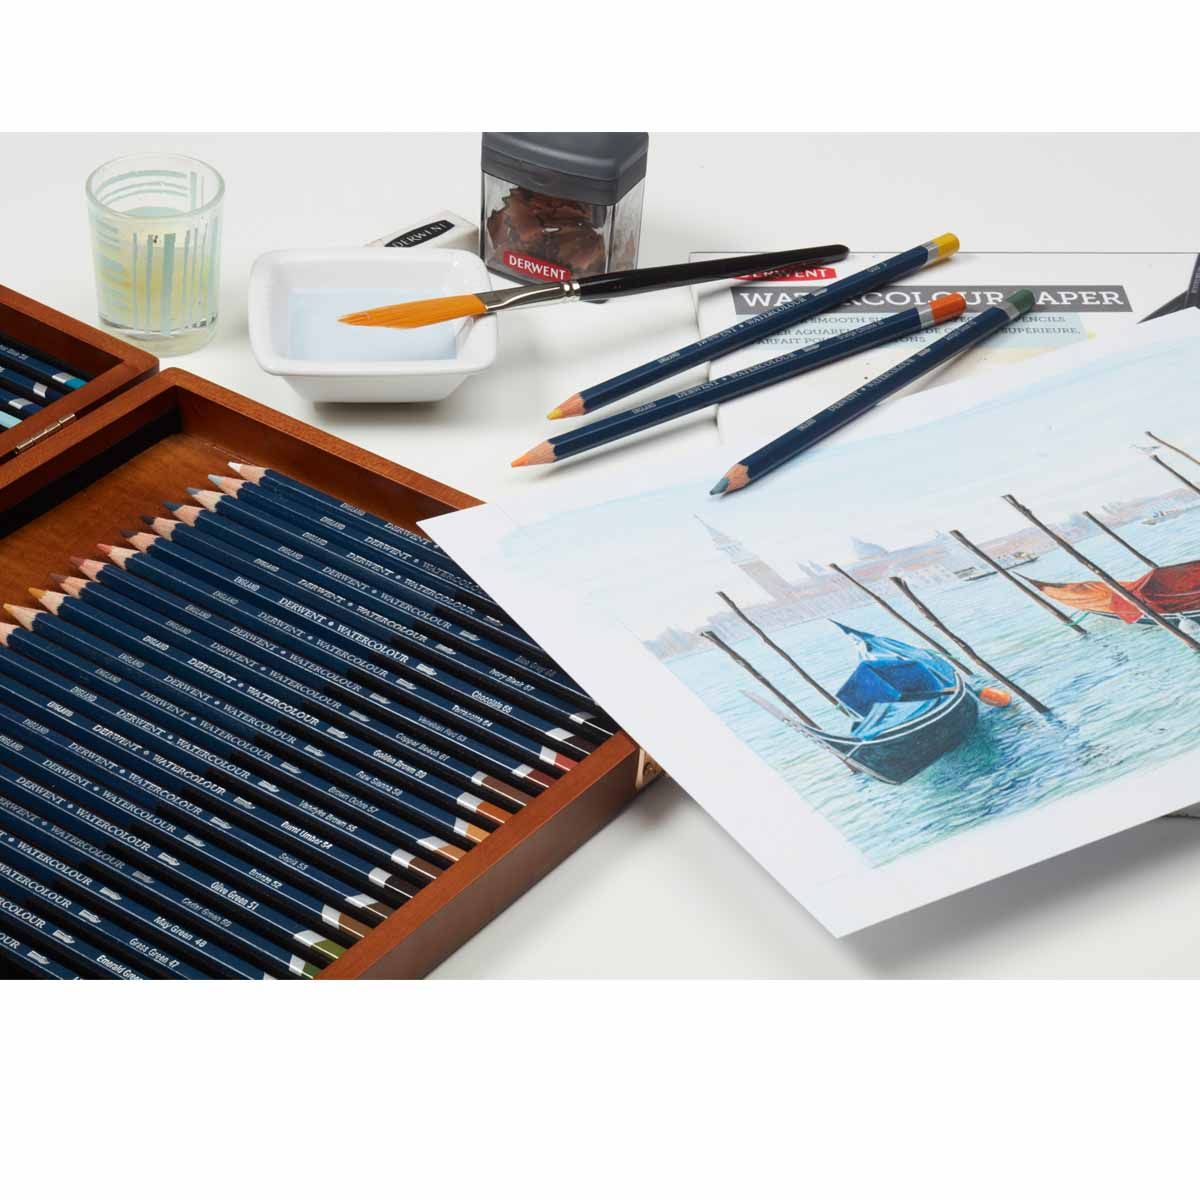 Create beautiful artwork with the subtlety of watercolor with the precision of a pencil